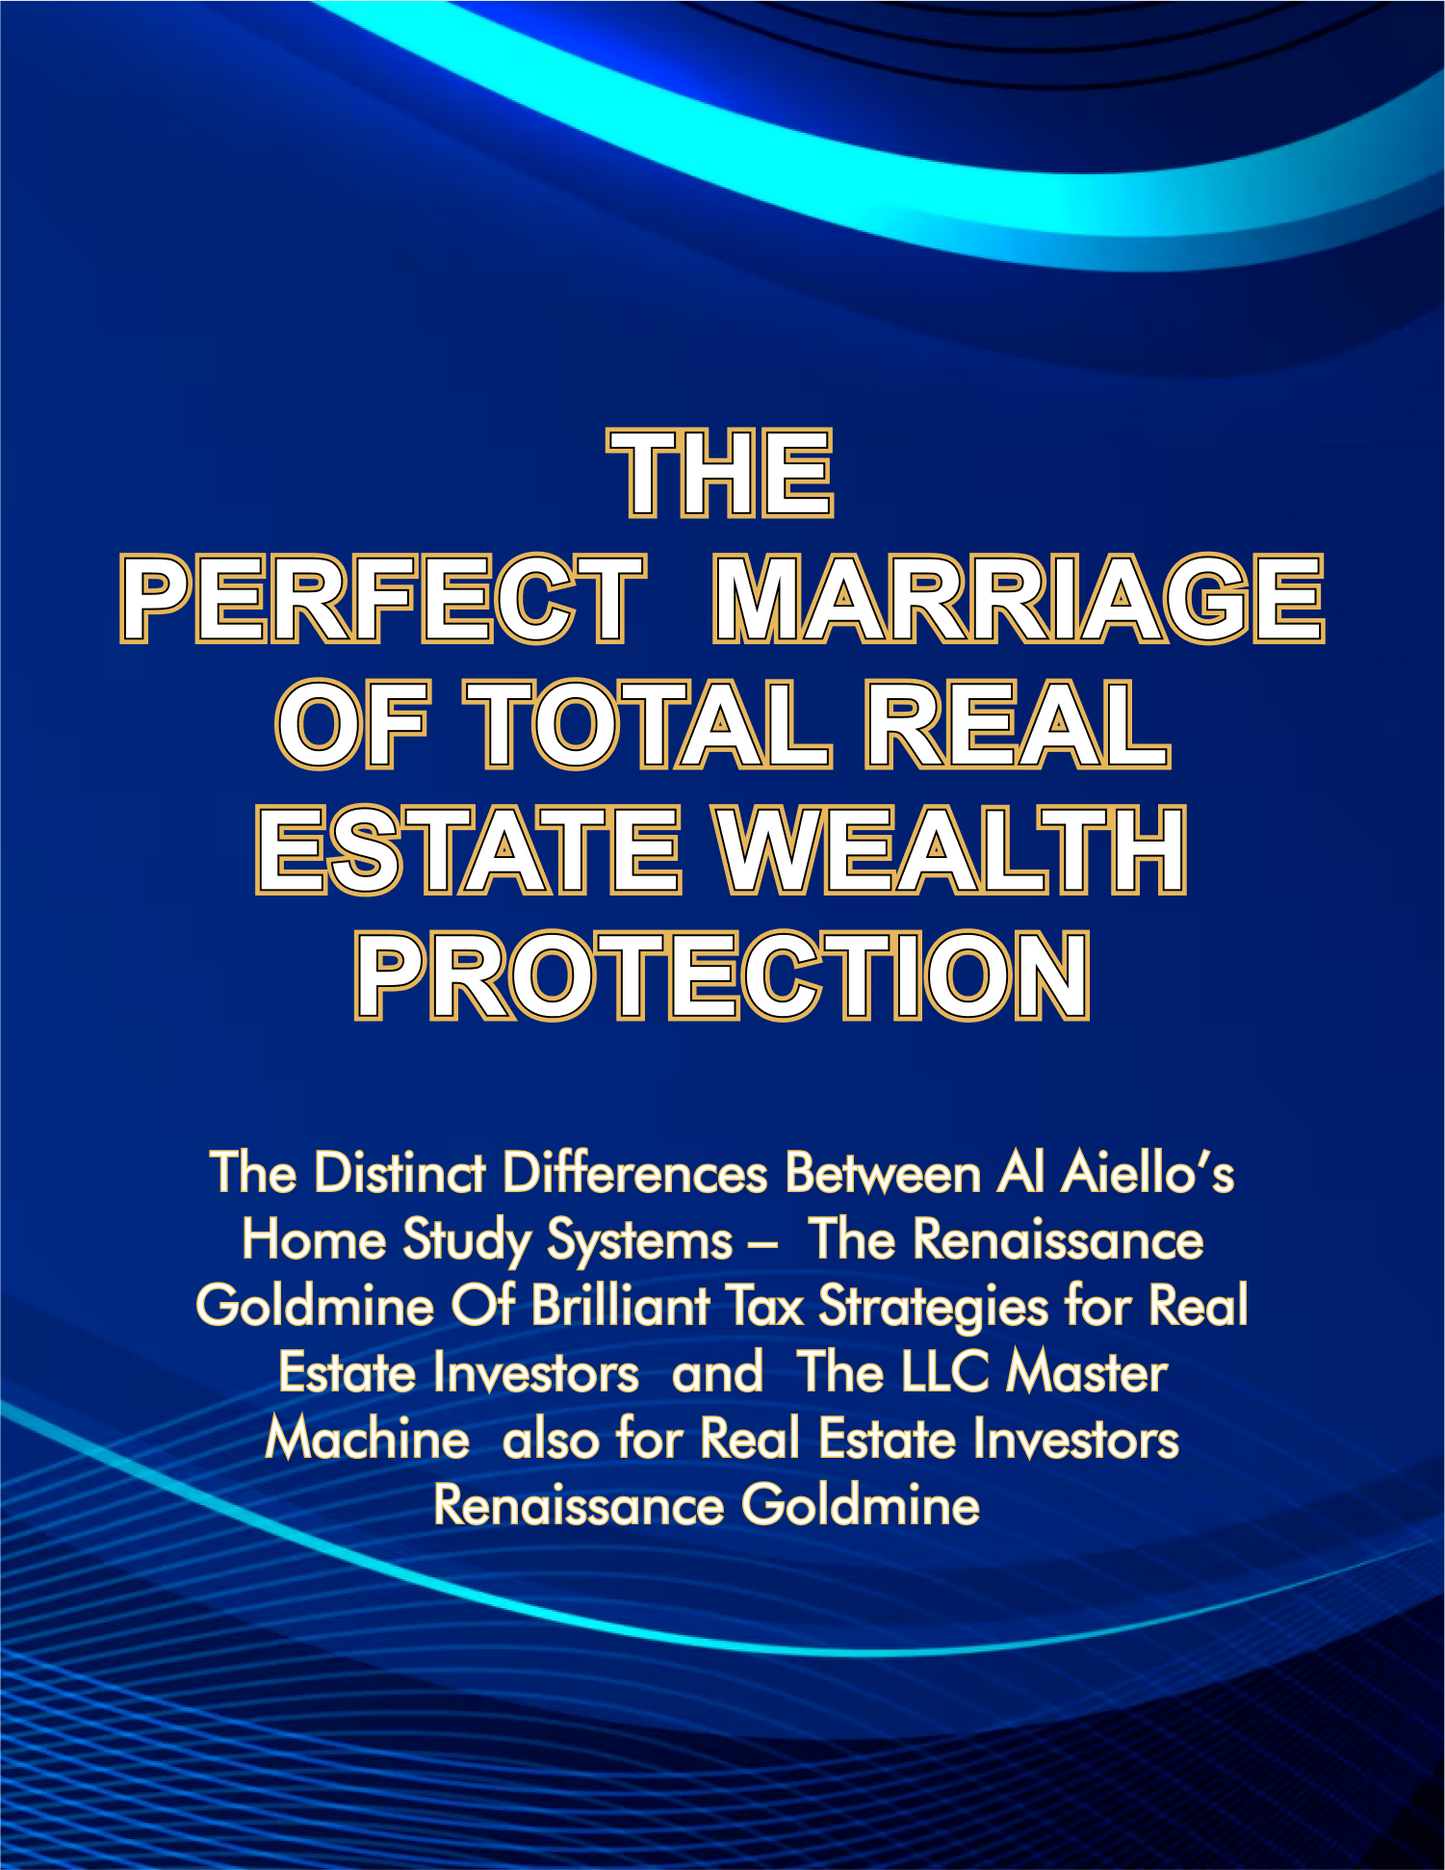 The Perfect Marriage Of Total Real Estate Wealth Protection!